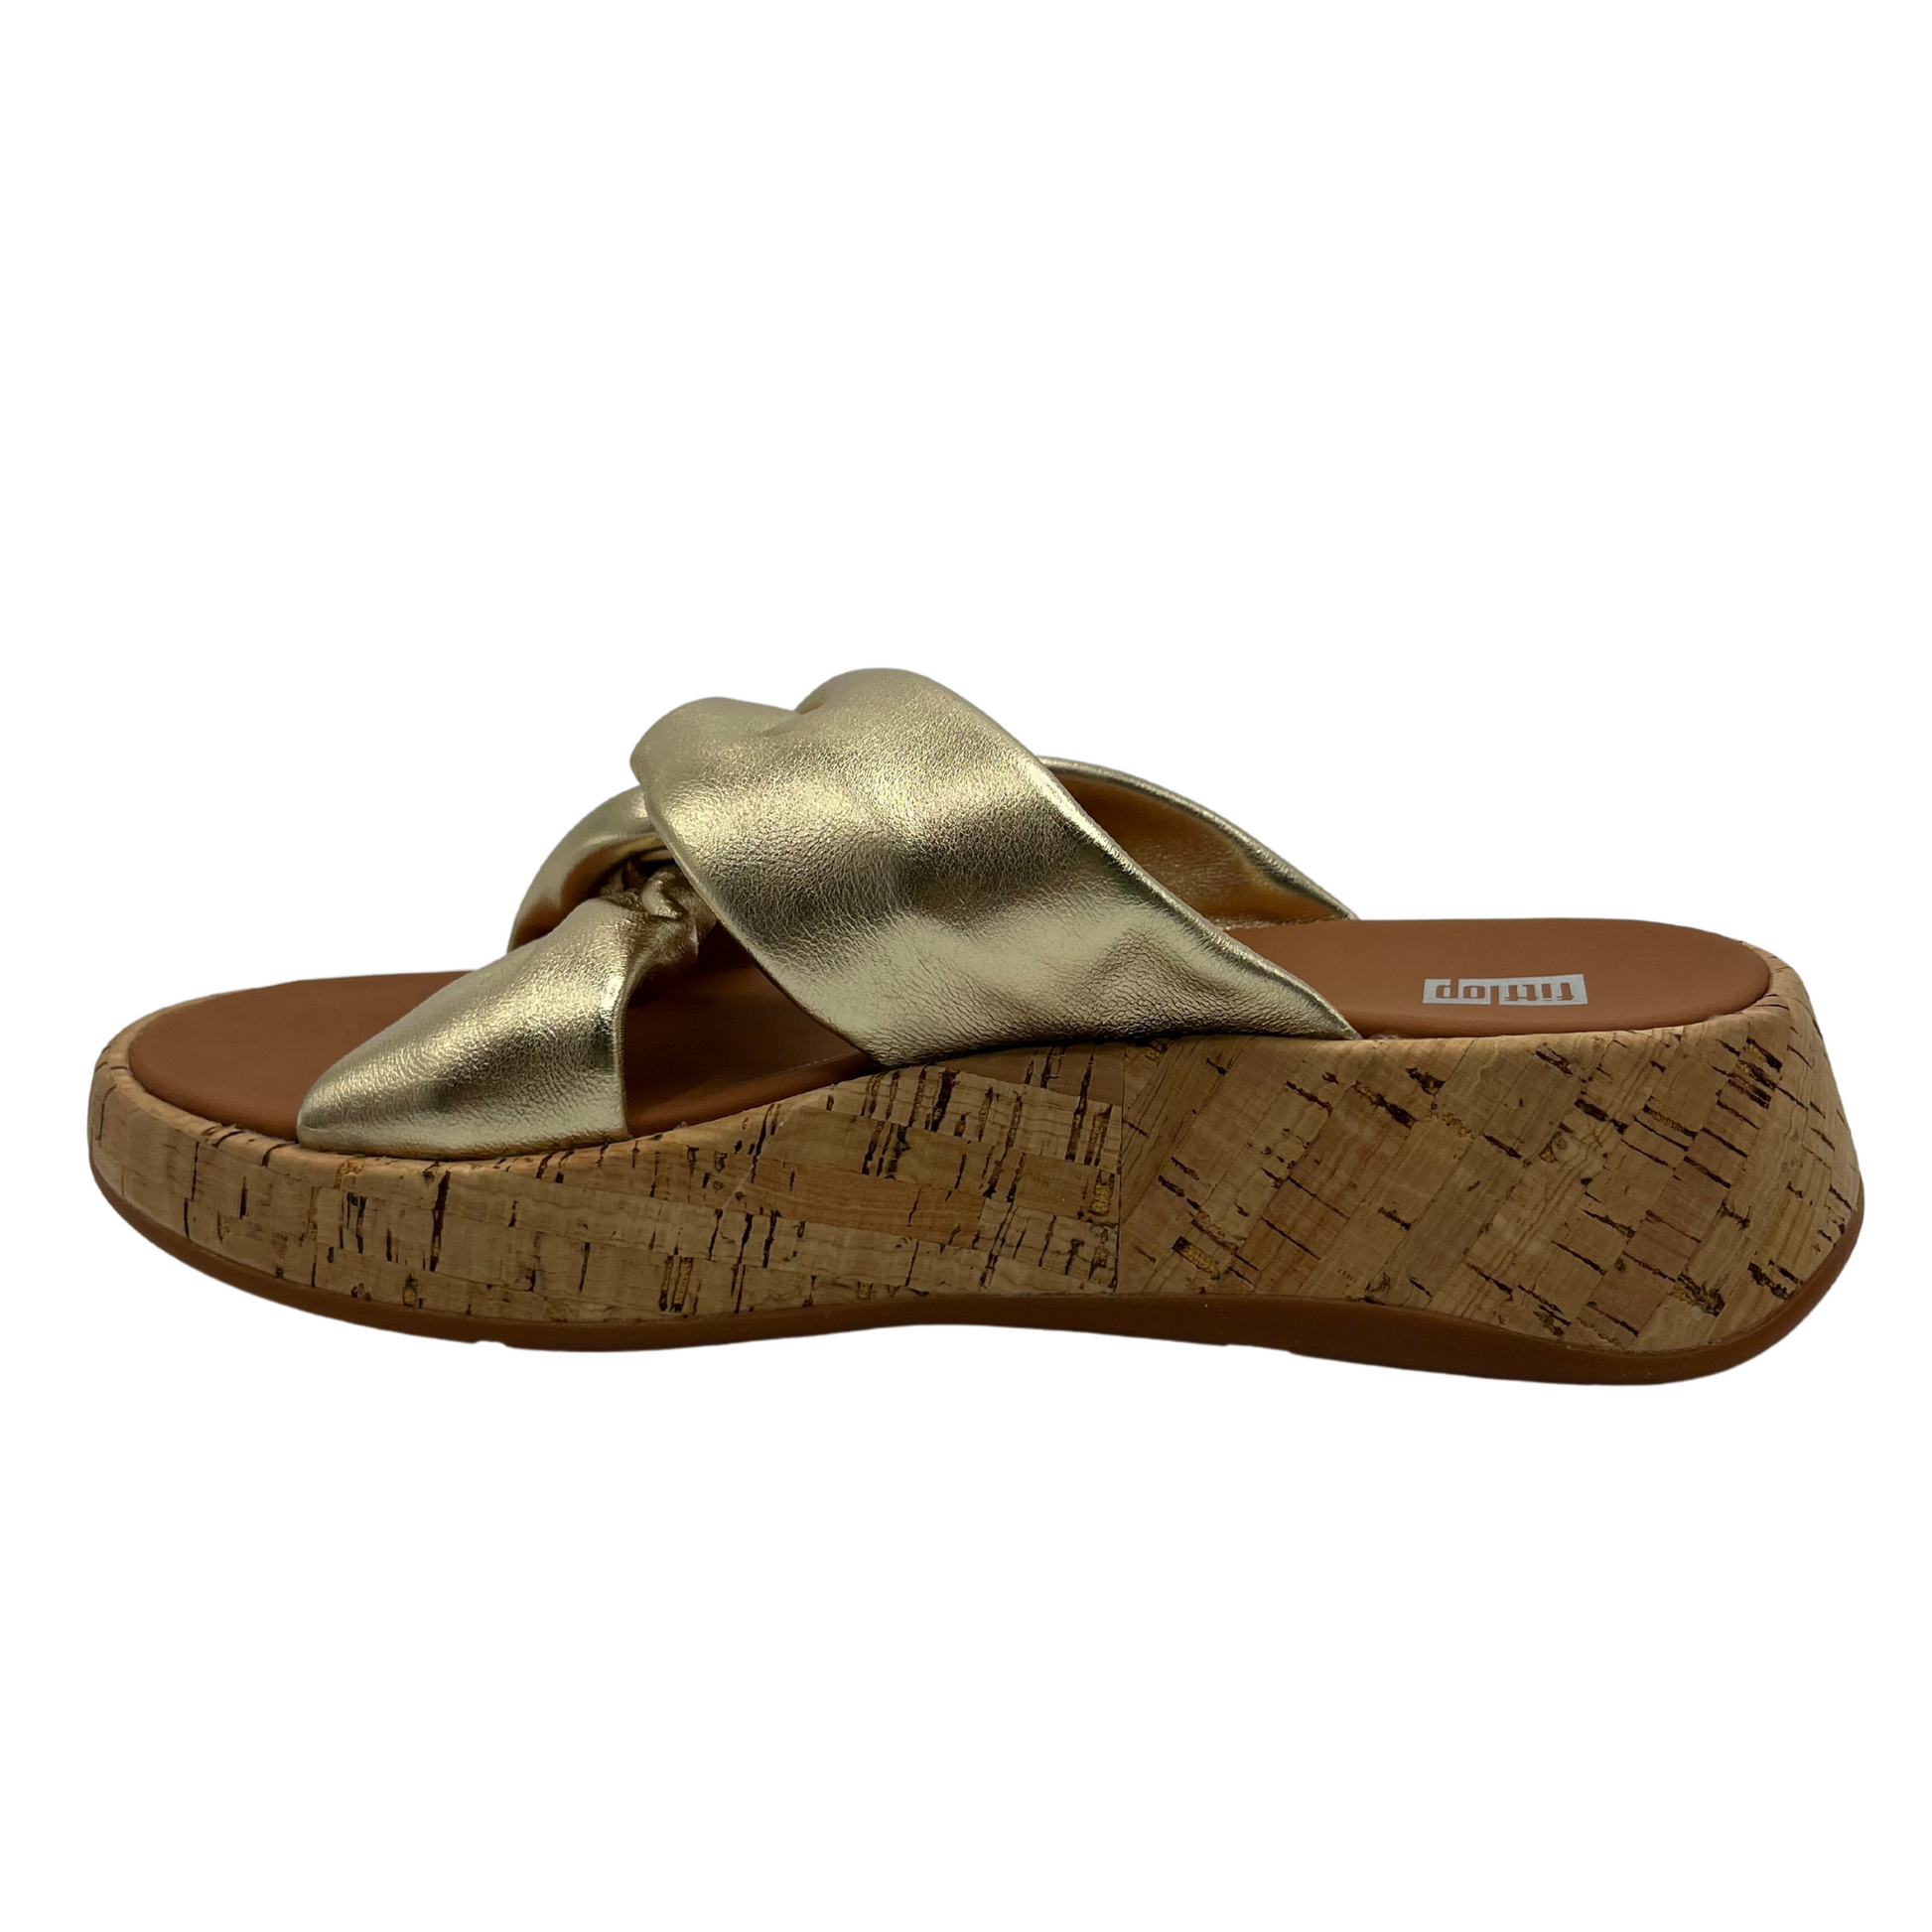 Left facing view of gold leather strapped sandal with thick platform sole and knot detail